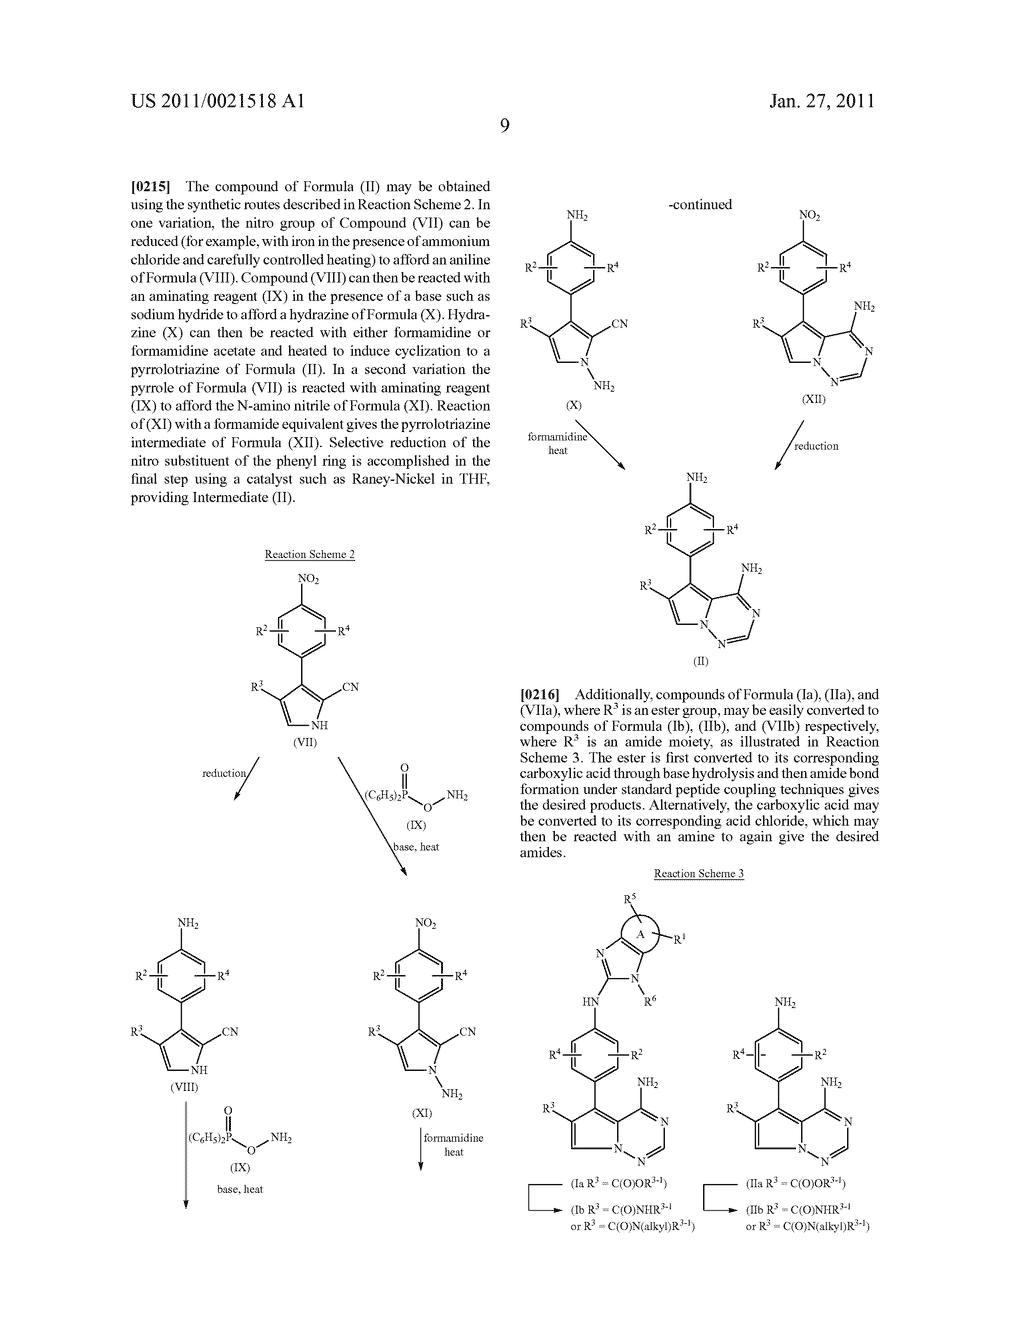 PYRROLOTRIAZINE DERIVATIVES USEFUL FOR TREATING CANCER THROUGH INHIBITION OF AURORA KINASE - diagram, schematic, and image 10